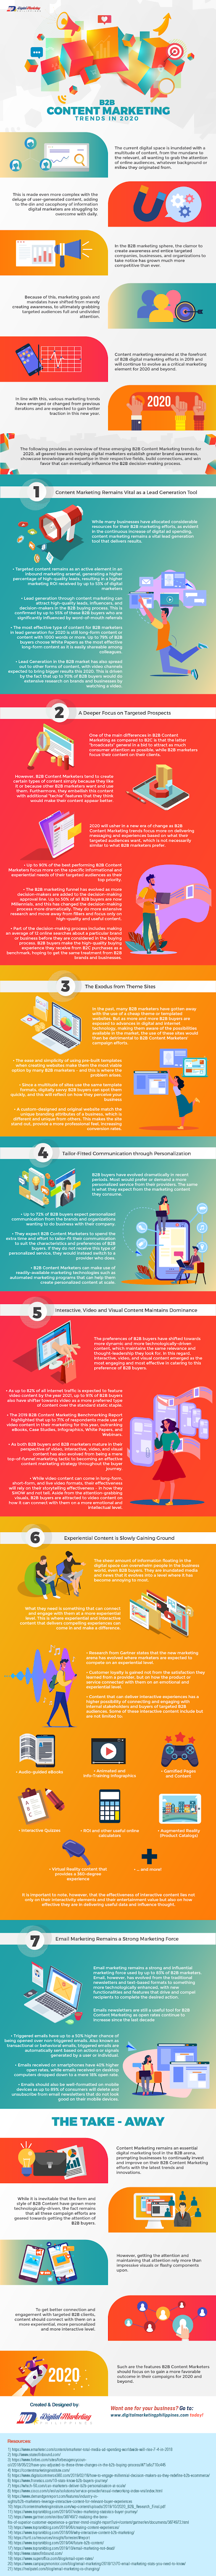 B2B Content Marketing Trends in 2020 #infographic